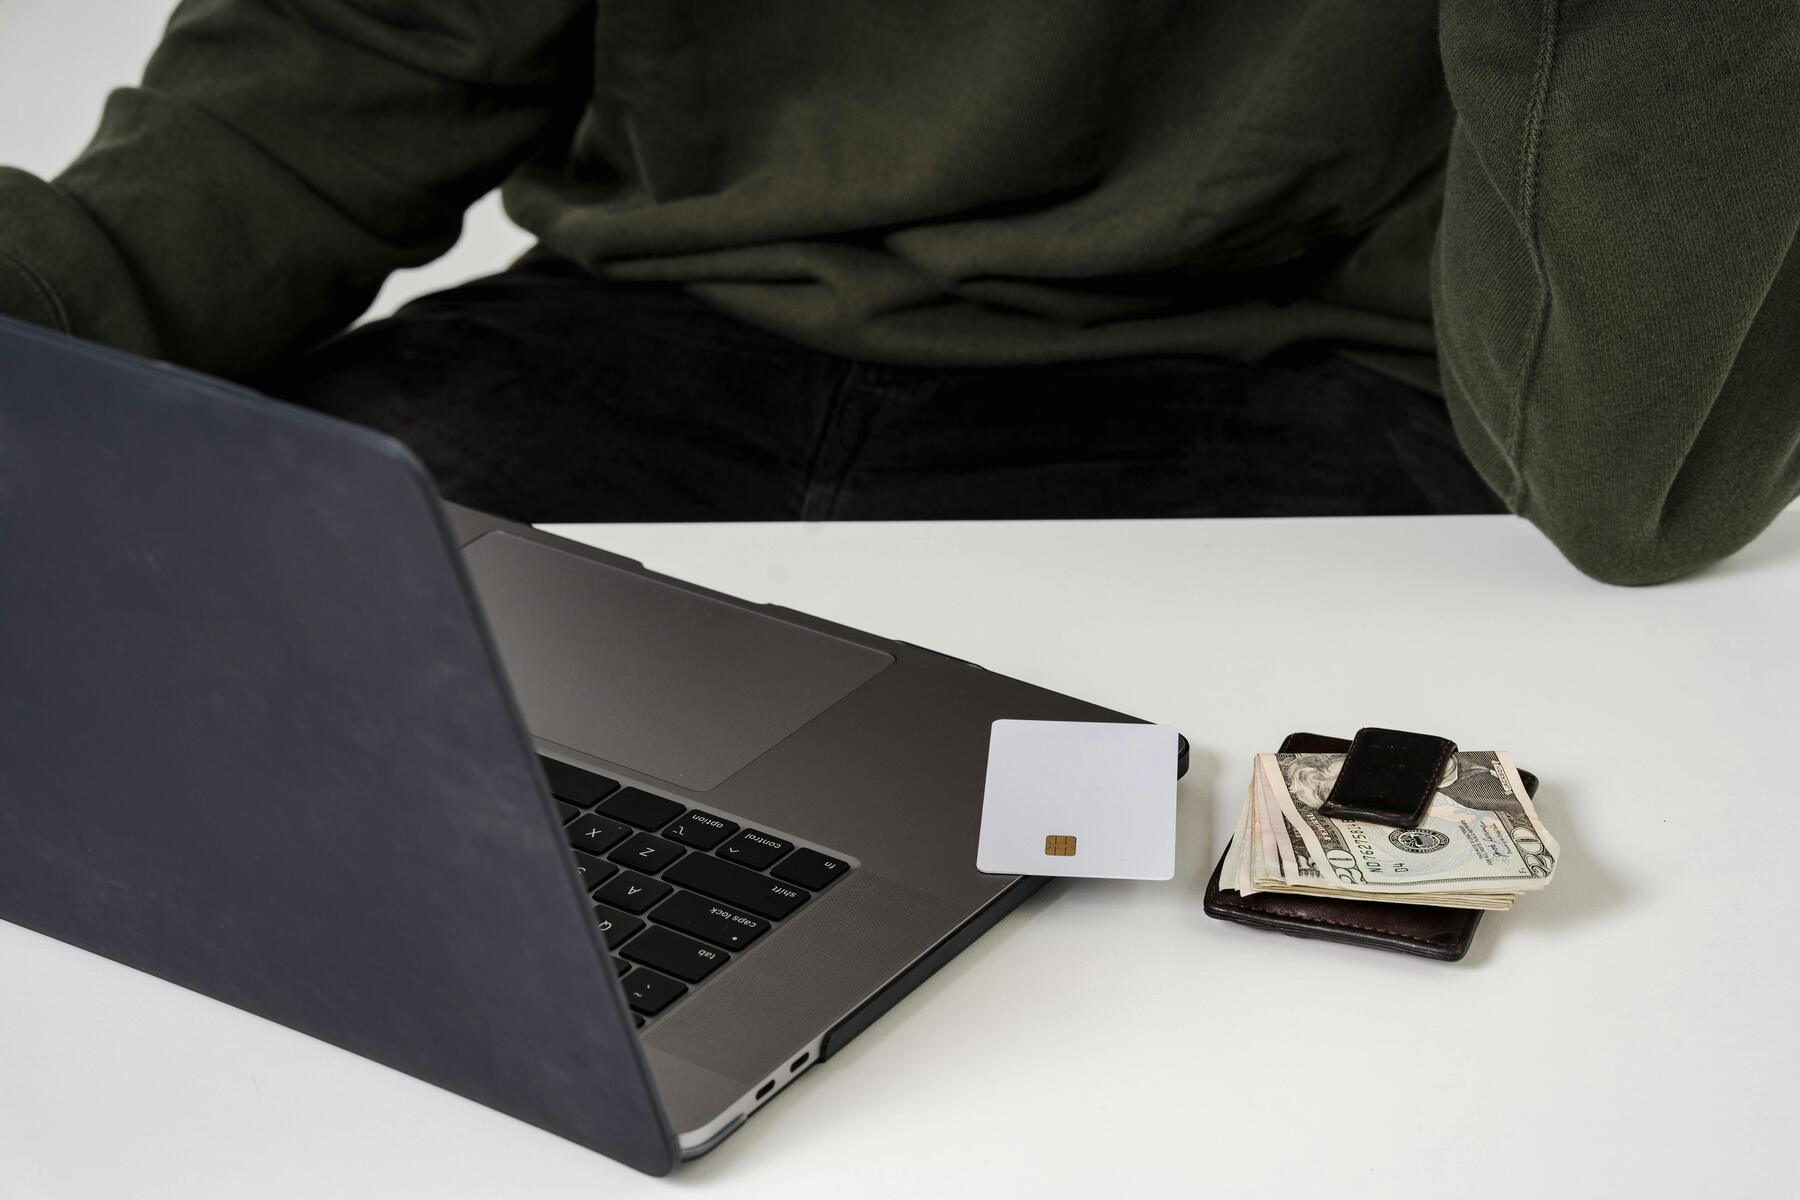 A credit card on the laptop with bills and a wallet beside it